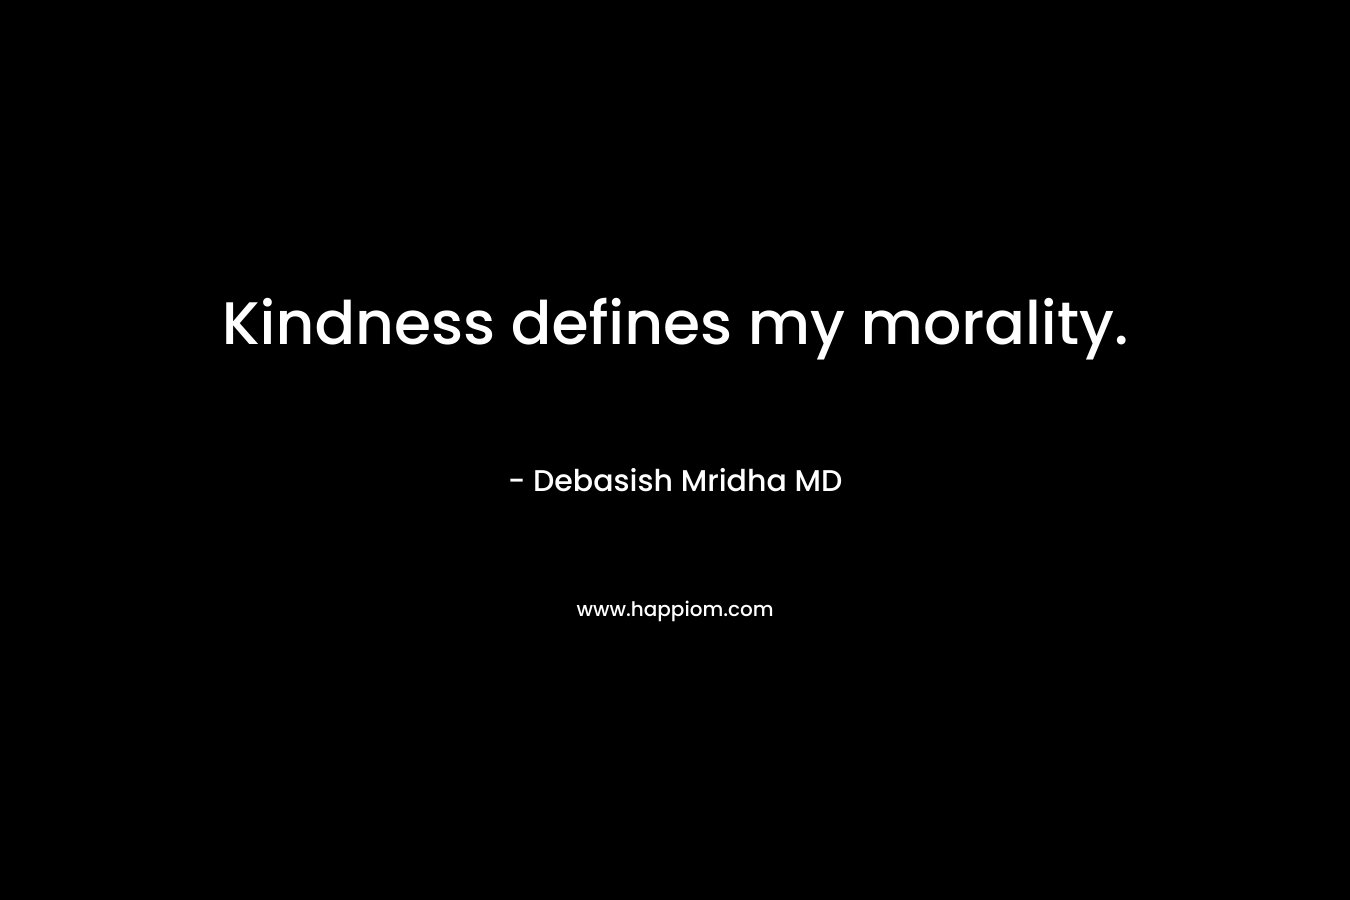 Kindness defines my morality.